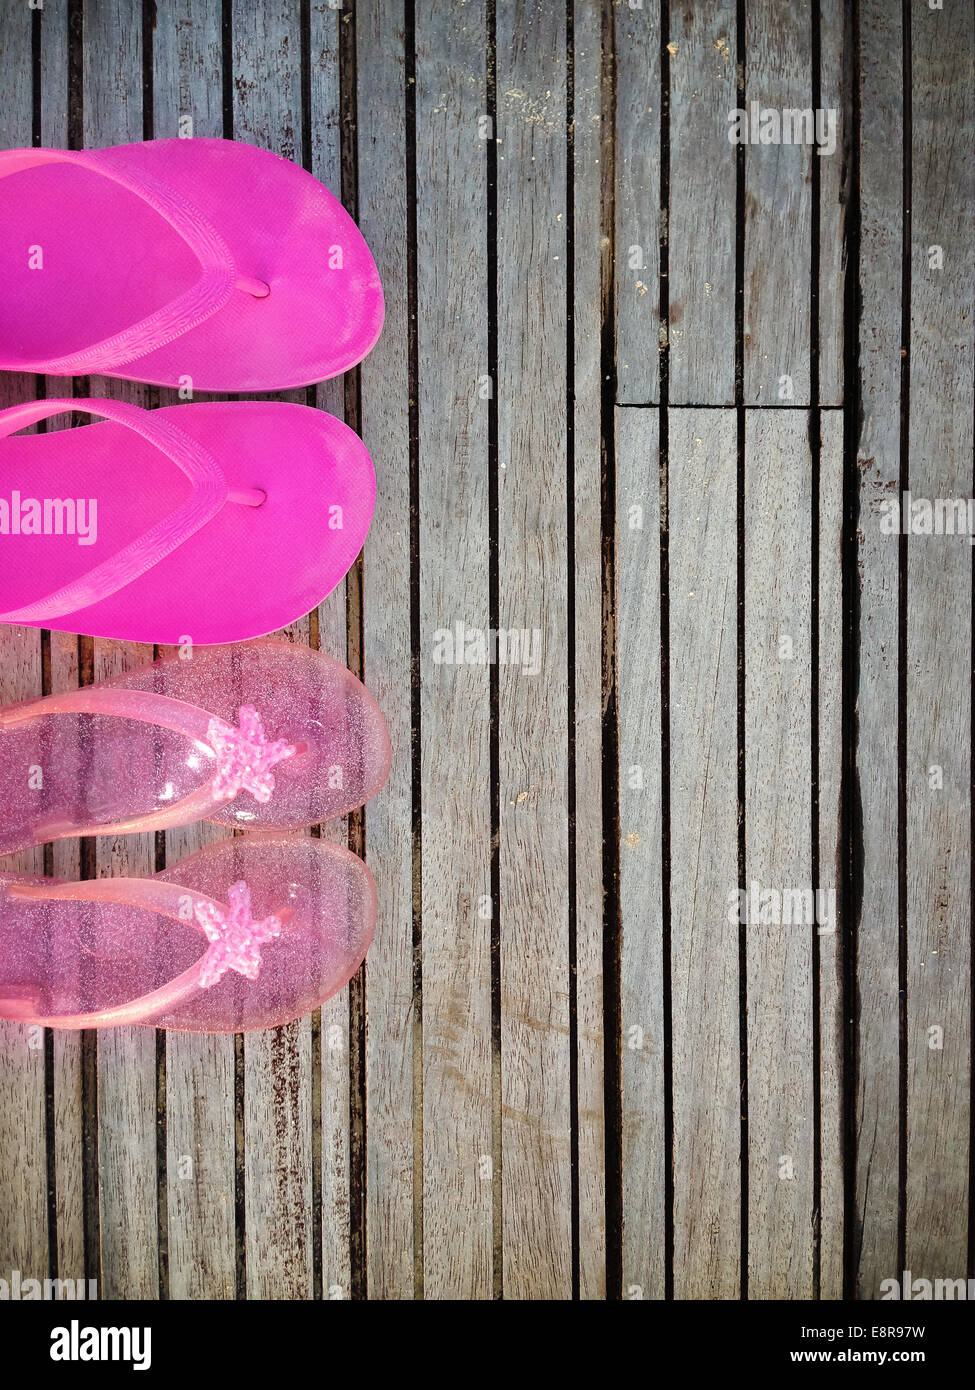 Brightly colored pink flip-flops of a mother and daughter on wood ...